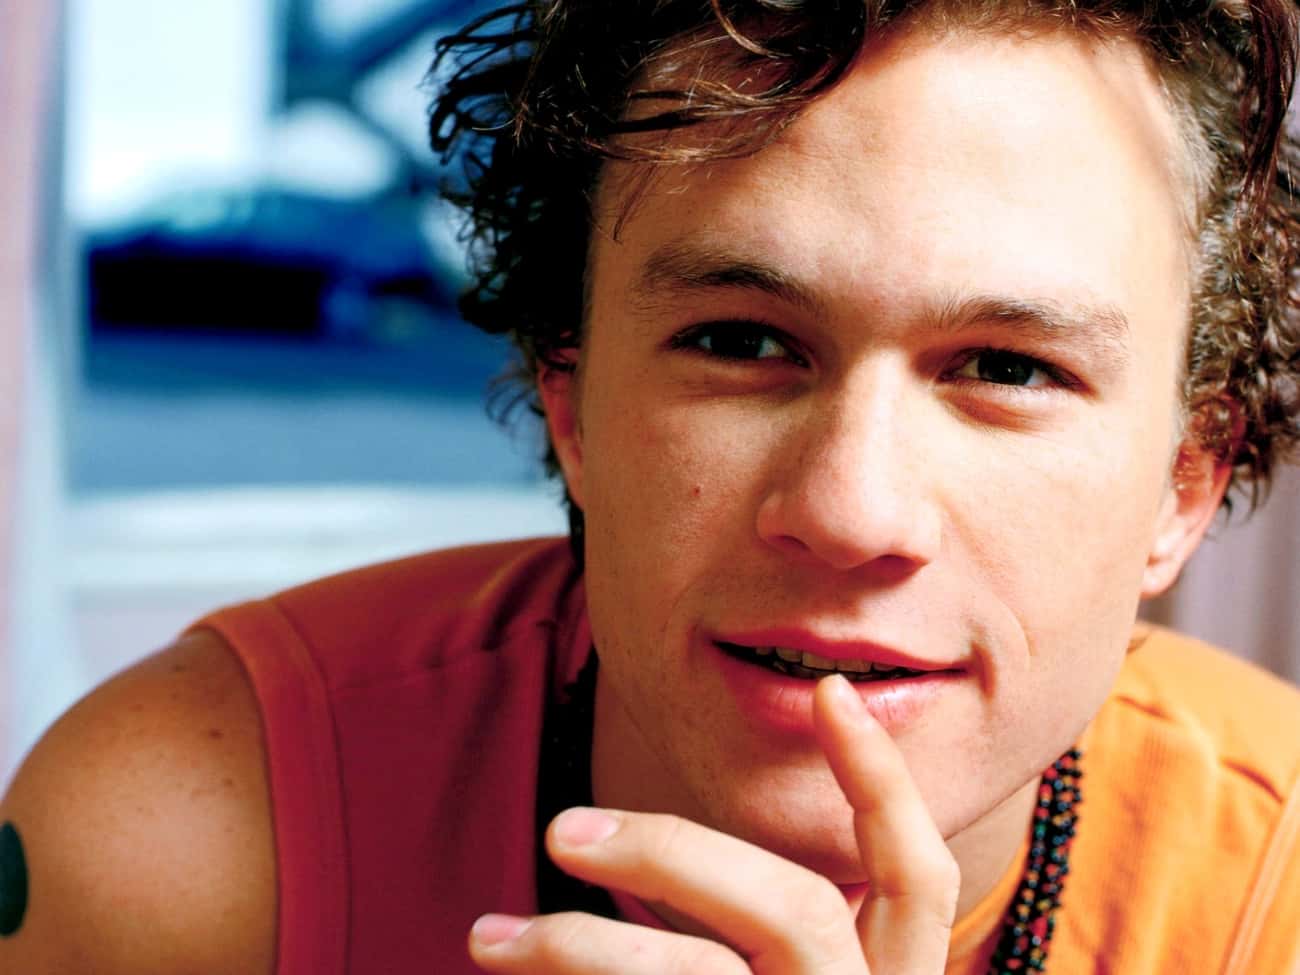 Young Heath Ledger in Pink and Orange Tank Top